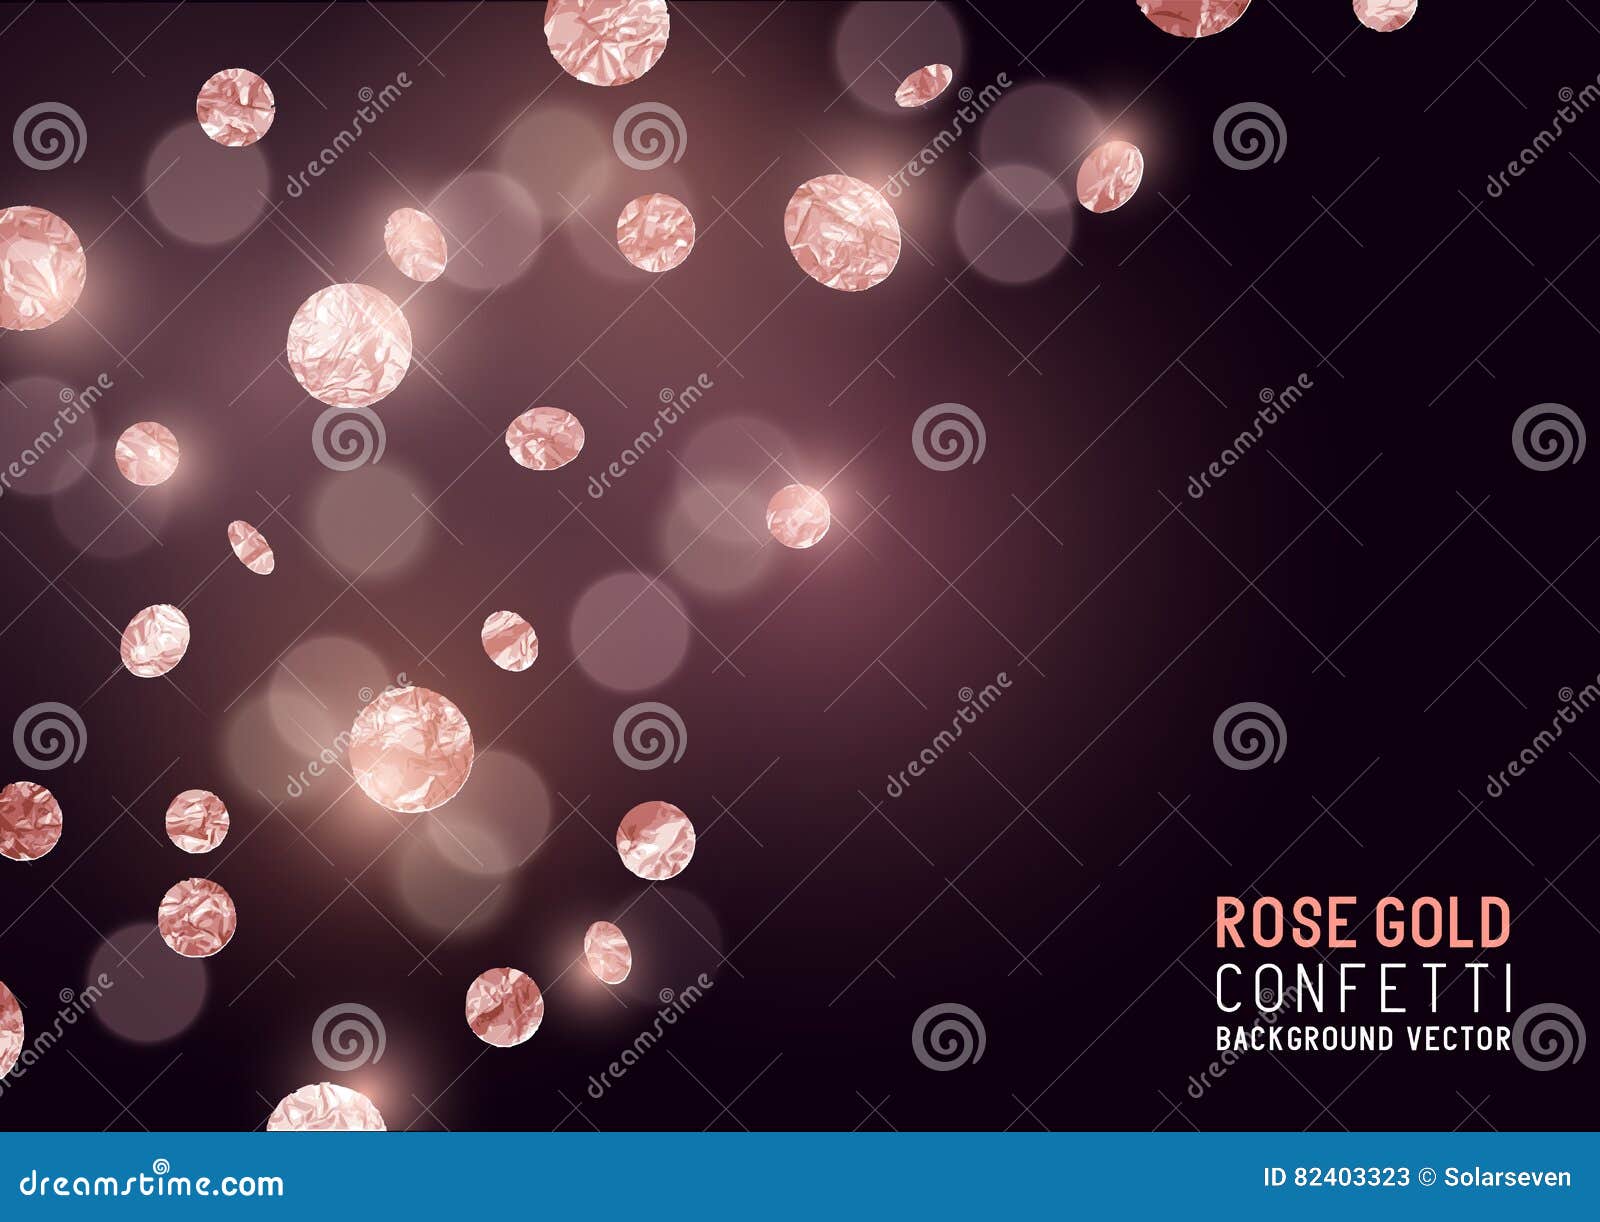 Rose Gold Wallpaper [Get Your Glam On]!